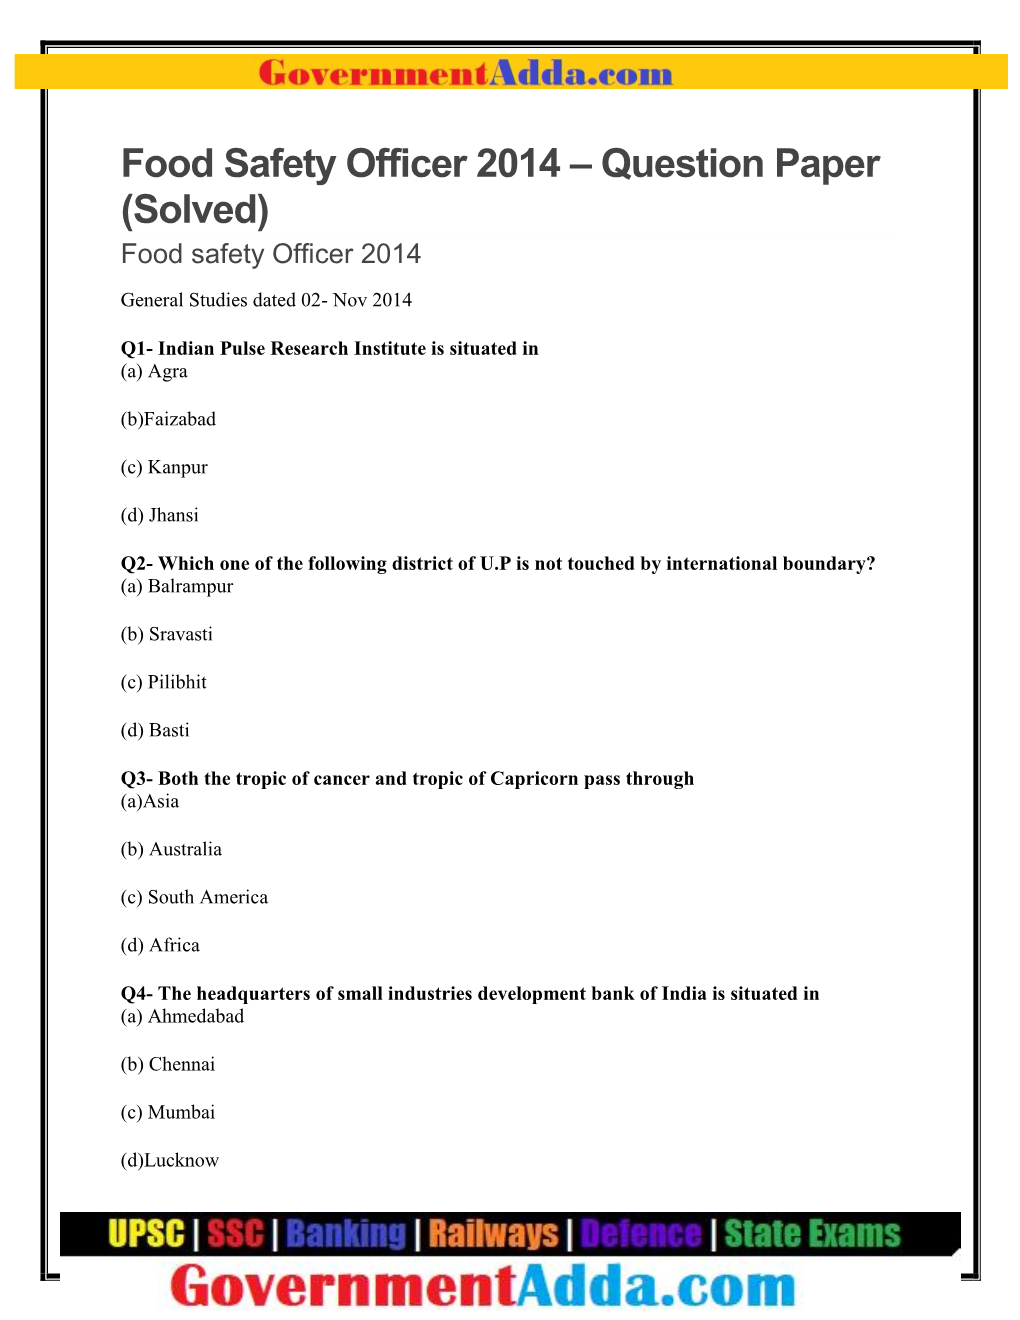 Question Paper (Solved) Food Safety Officer 2014